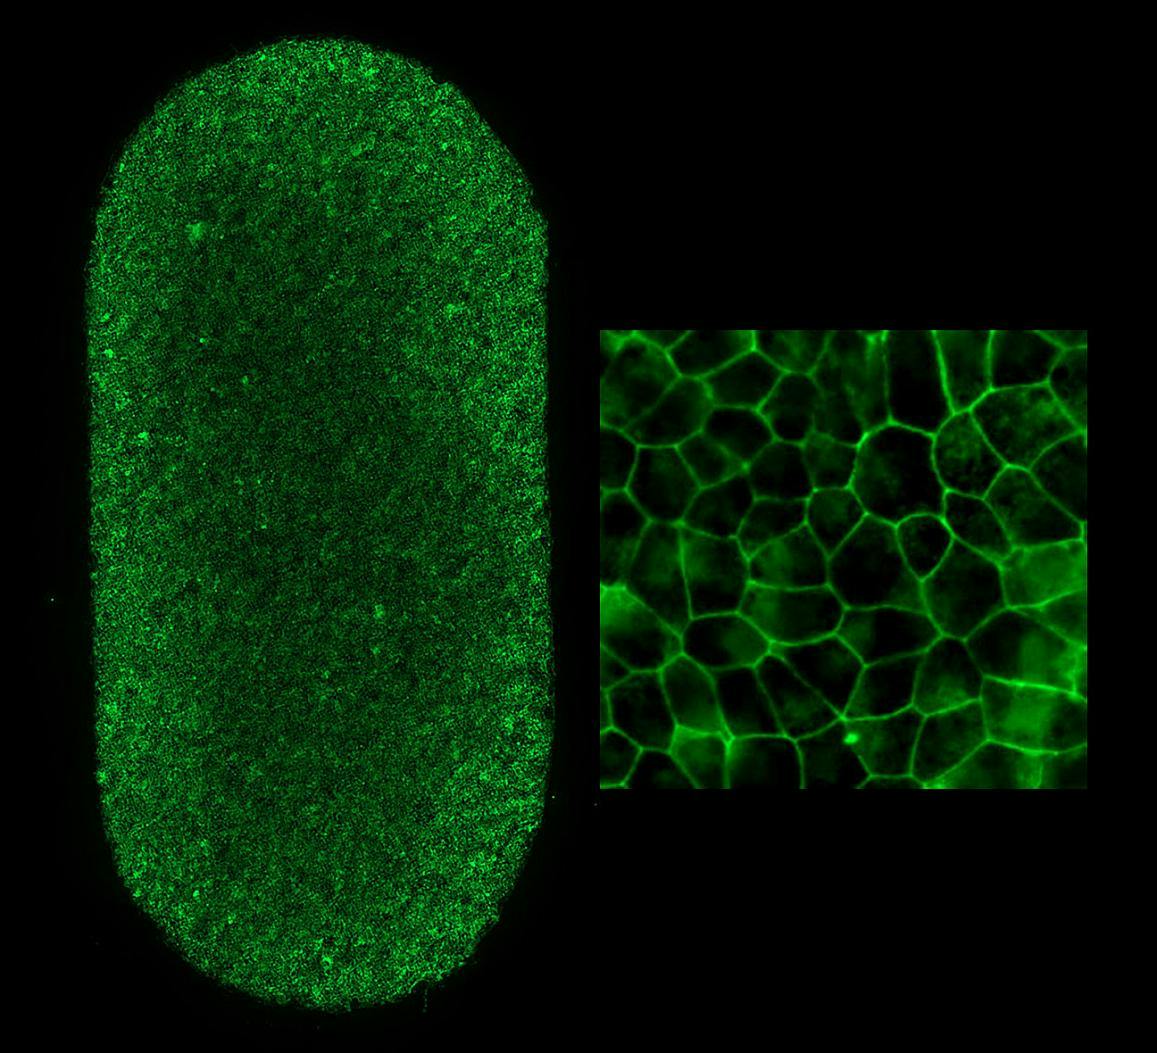 Left shows an image of the full-RPE-patch (2 x 4 mm). Each dot is an RPE cell with the borders stained green. Each patch contains approximately 75,000 RPE cells. Right image shows patch RPE cells at higher magnification. (Image courtesy of Kapil Bharti, P.D, NEI)